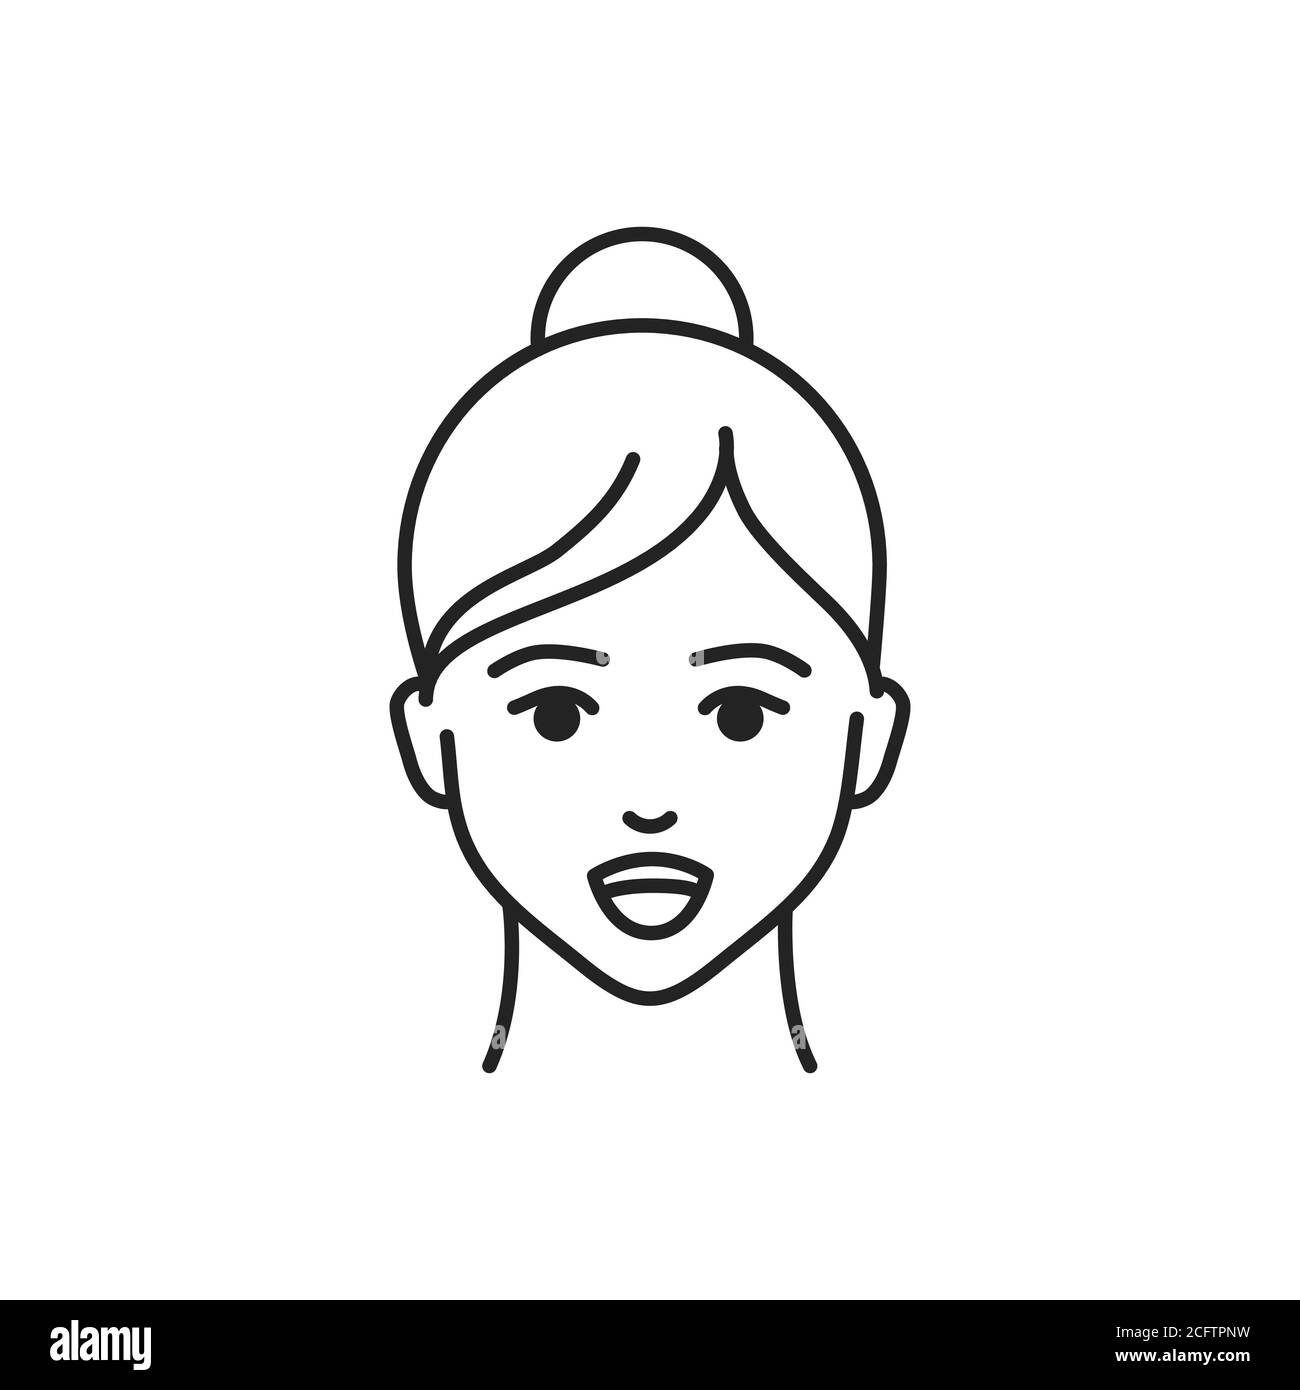 Human feeling awesome line black icon. Face of a young girl depicting emotion sketch element. Cute character on white background. Stock Vector